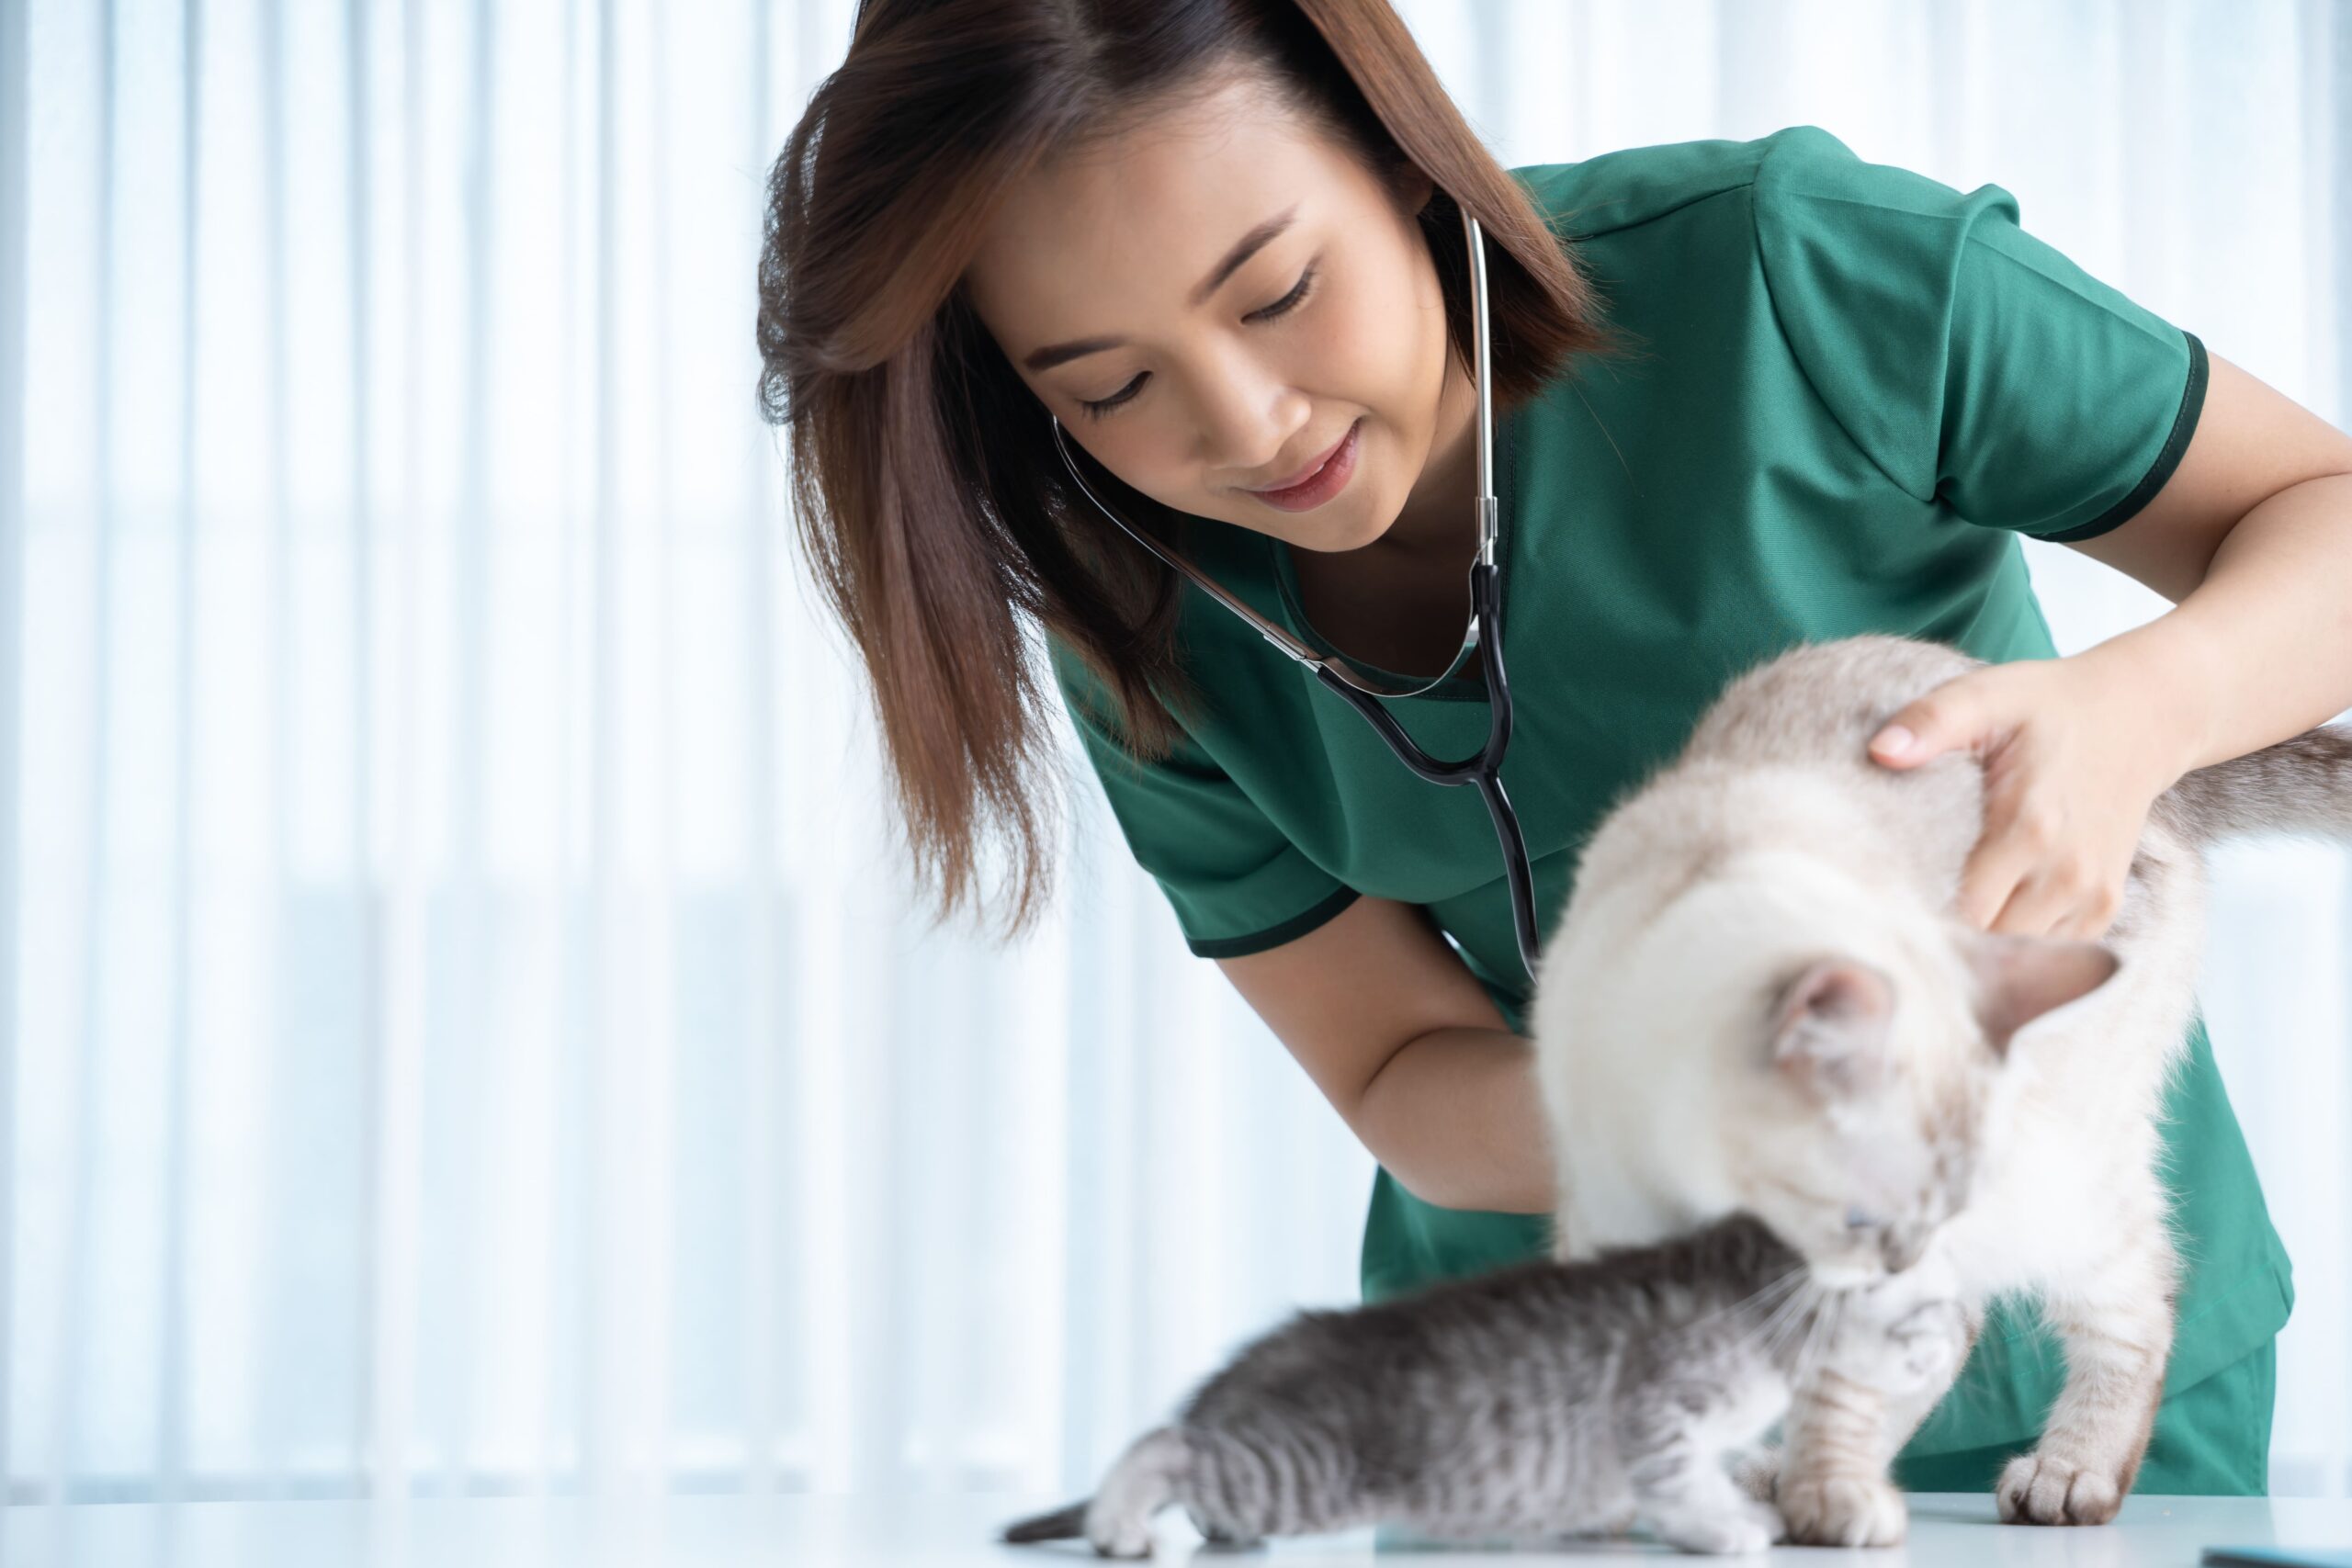 EC Healthcare Acquires Exotic Animal Veterinary Business Further Consolidate the Veterinary Industry and Diversify the Business Portfolio